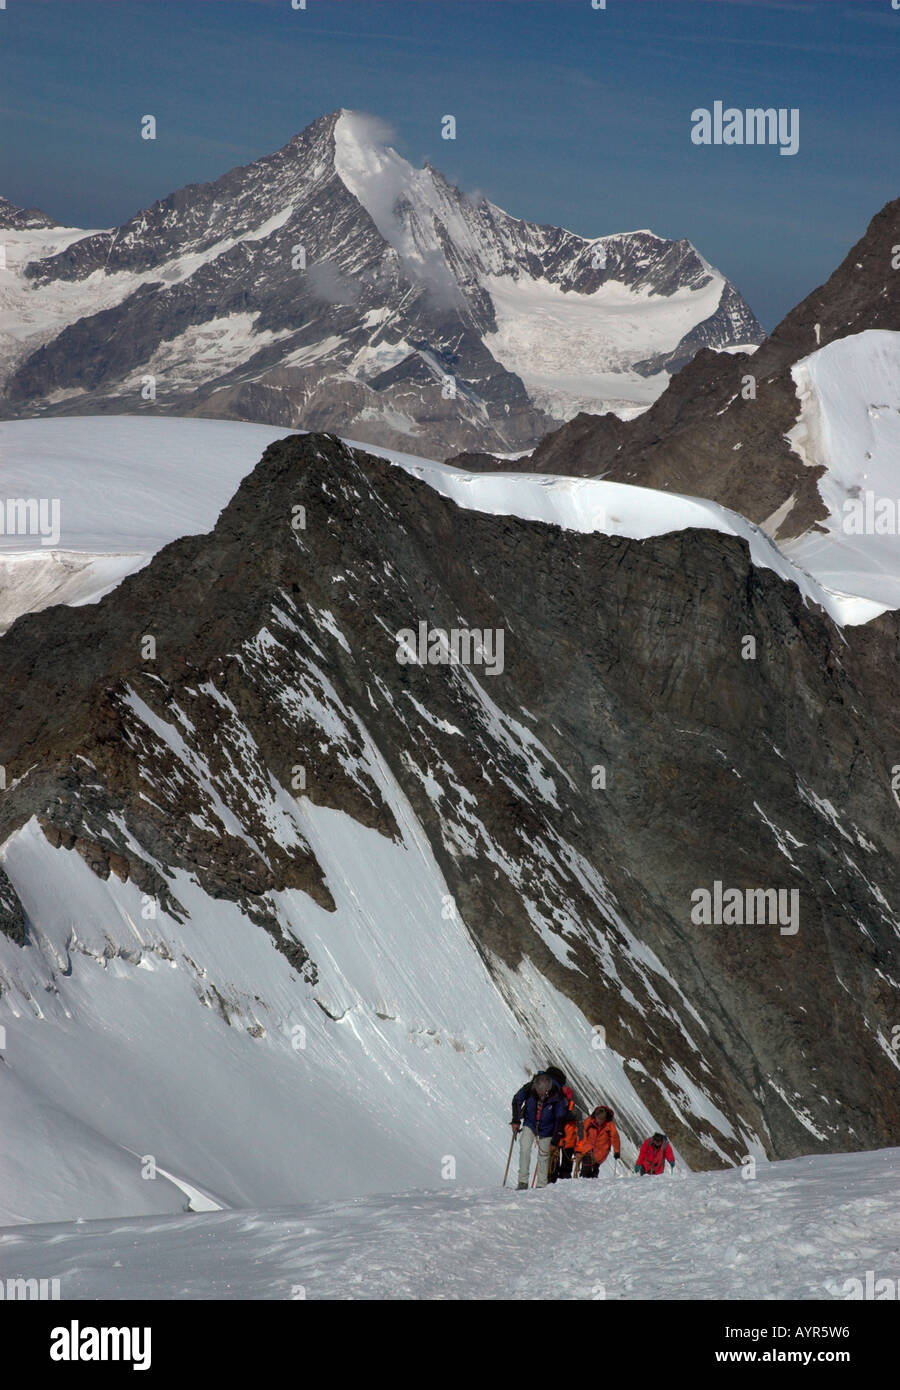 A roped party of four climbers ascending the Allalinhorn in the Swiss Valais Alps with the Obergabelhorn behind Stock Photo